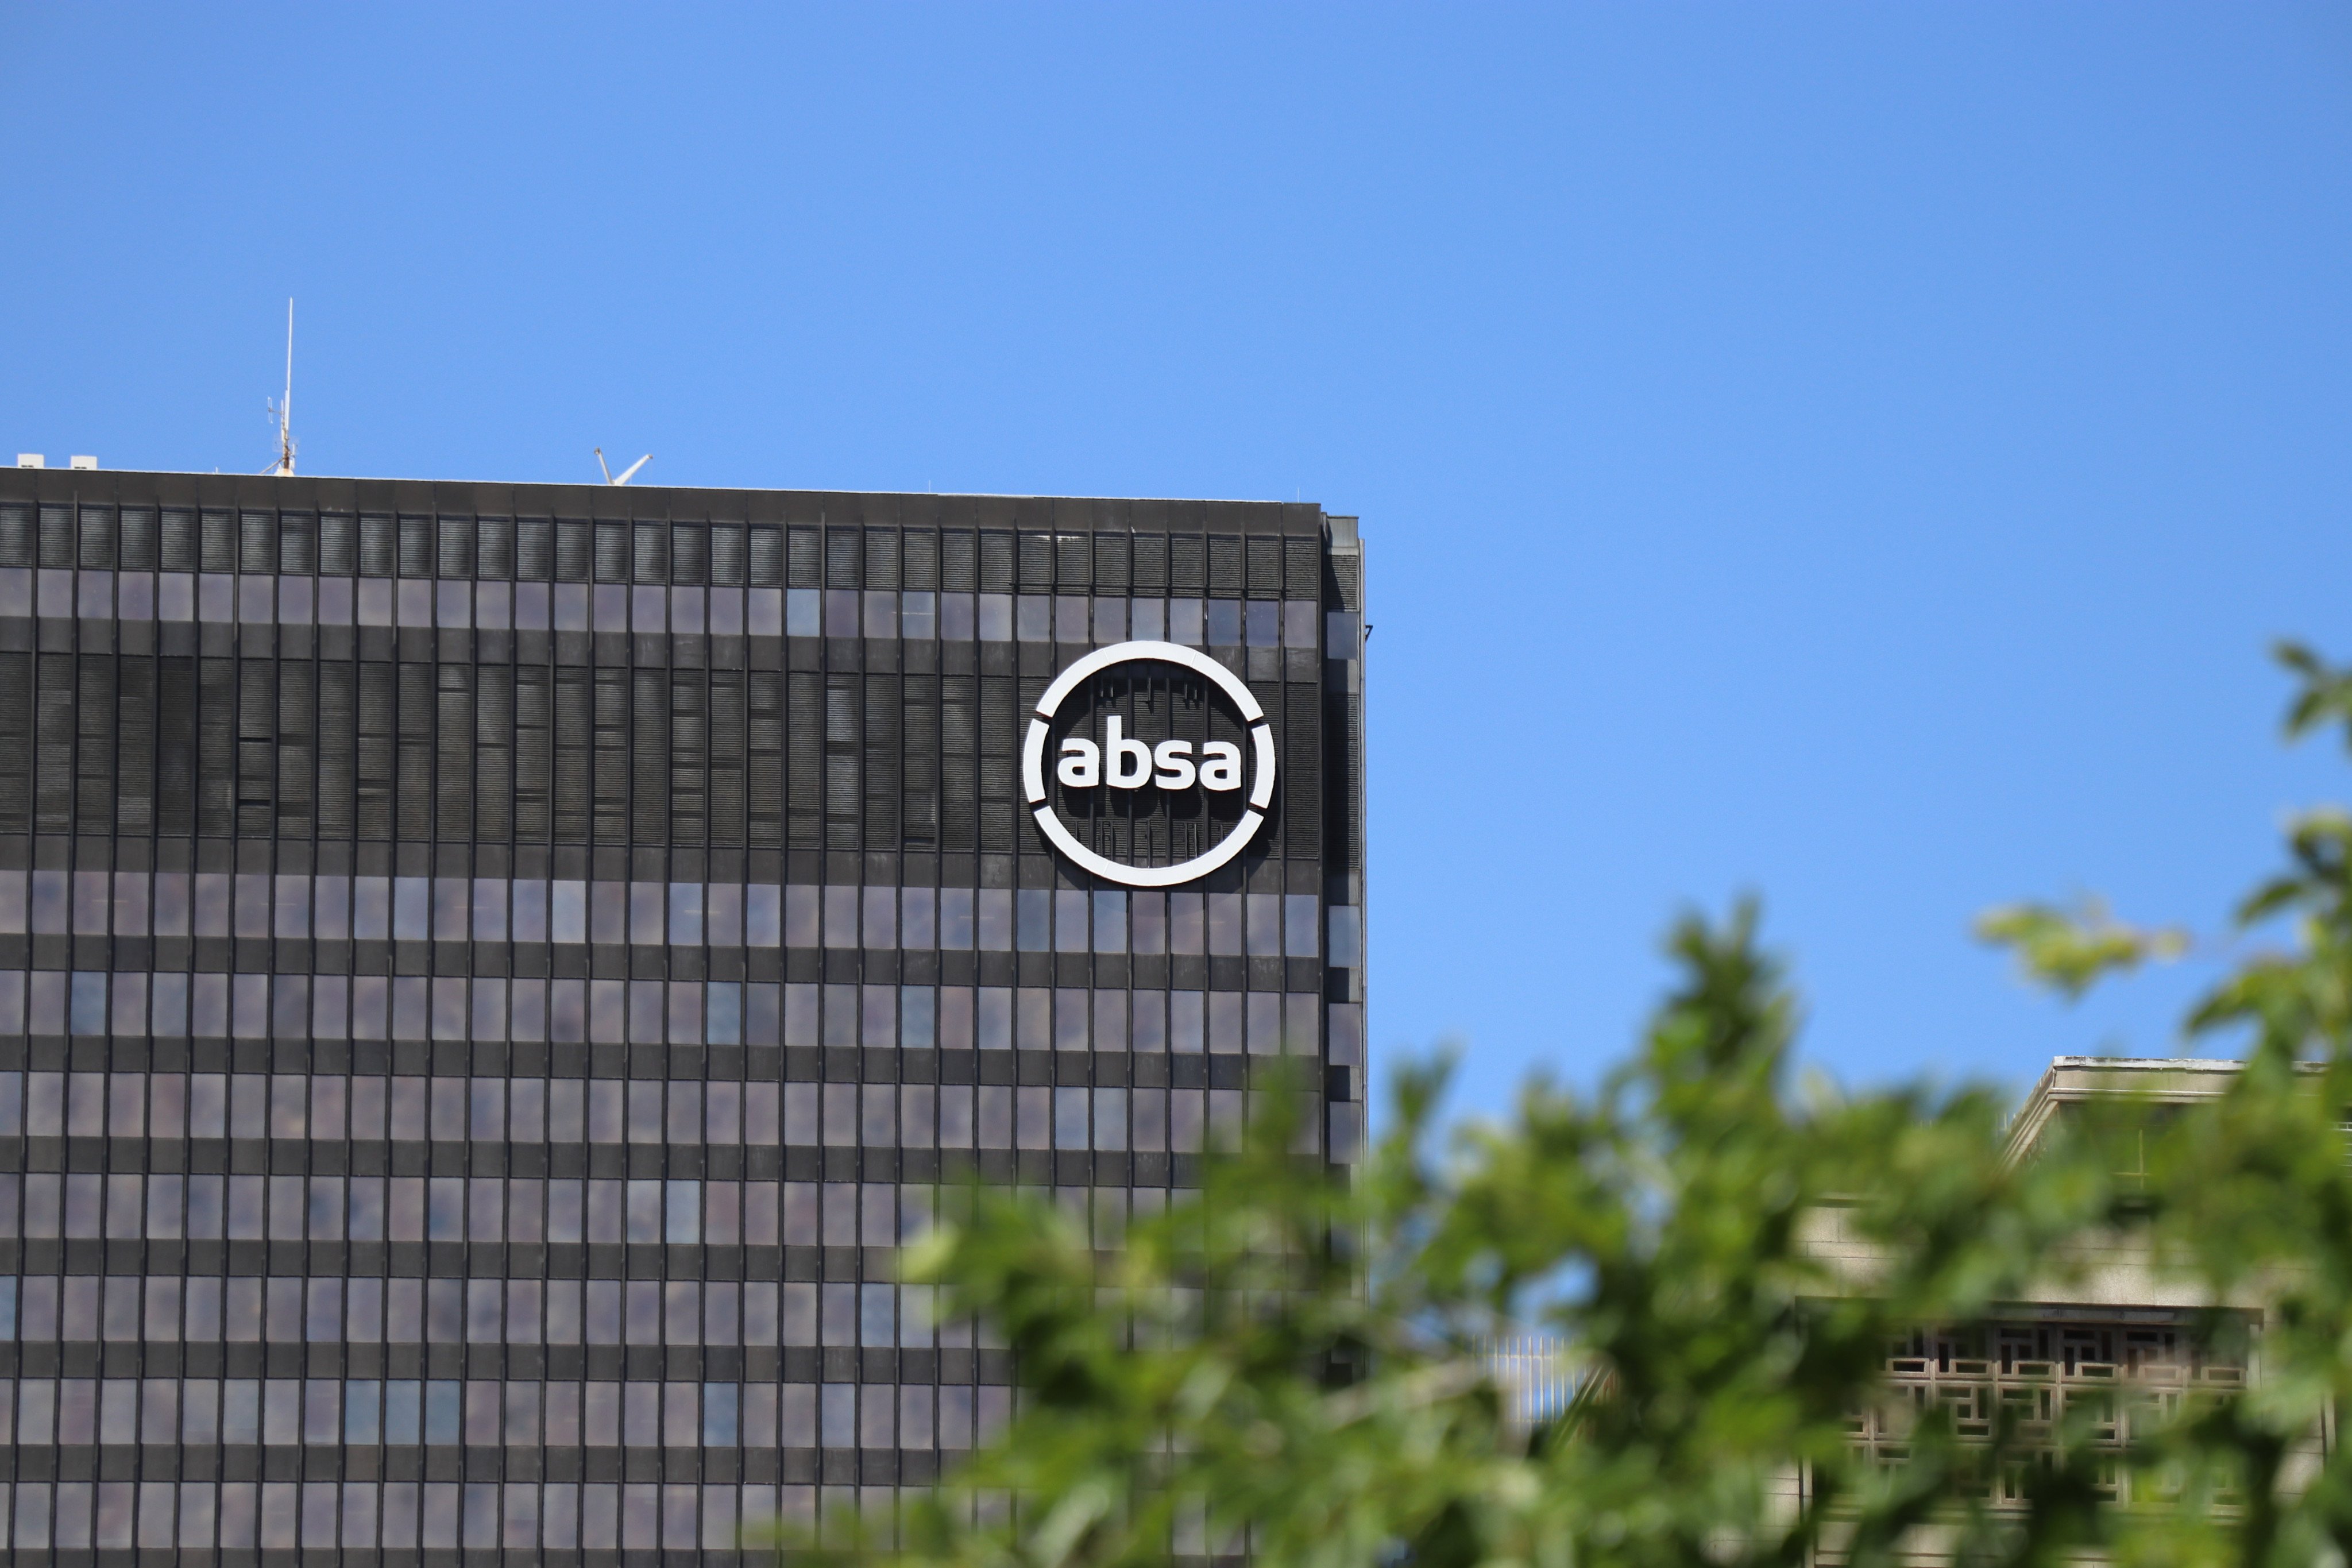 Absa Group, one of Africa’s largest diversified financial services companies, opened its China representative office last month. Photo: Shutterstock